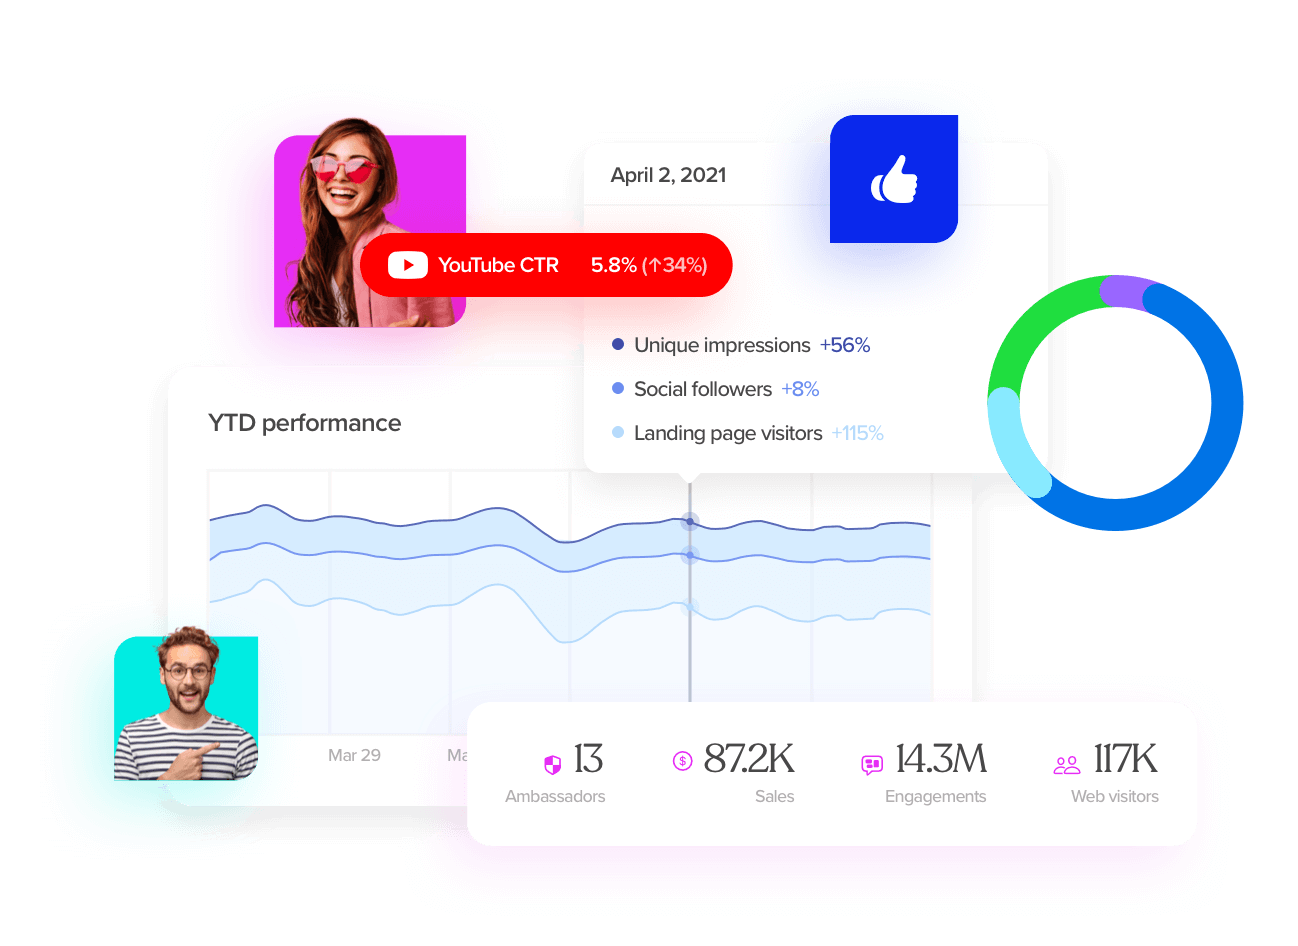 Tiled image mixed with photos of influencers, charts and graphs measuring performance and of social engagement with thumbs up.